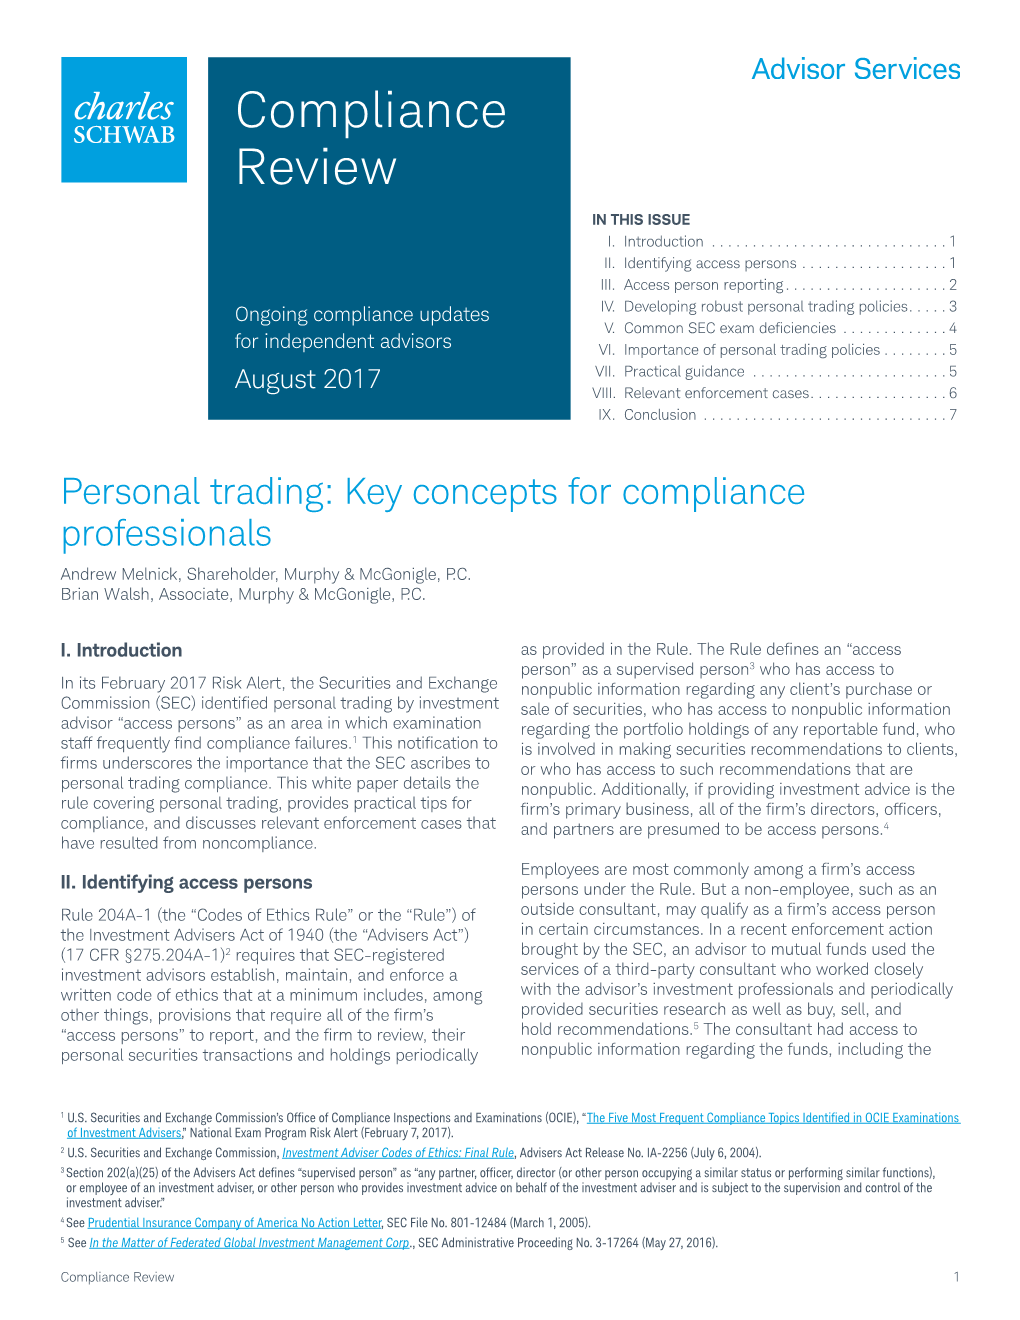 Schwab Compliance Review | Personal Trading